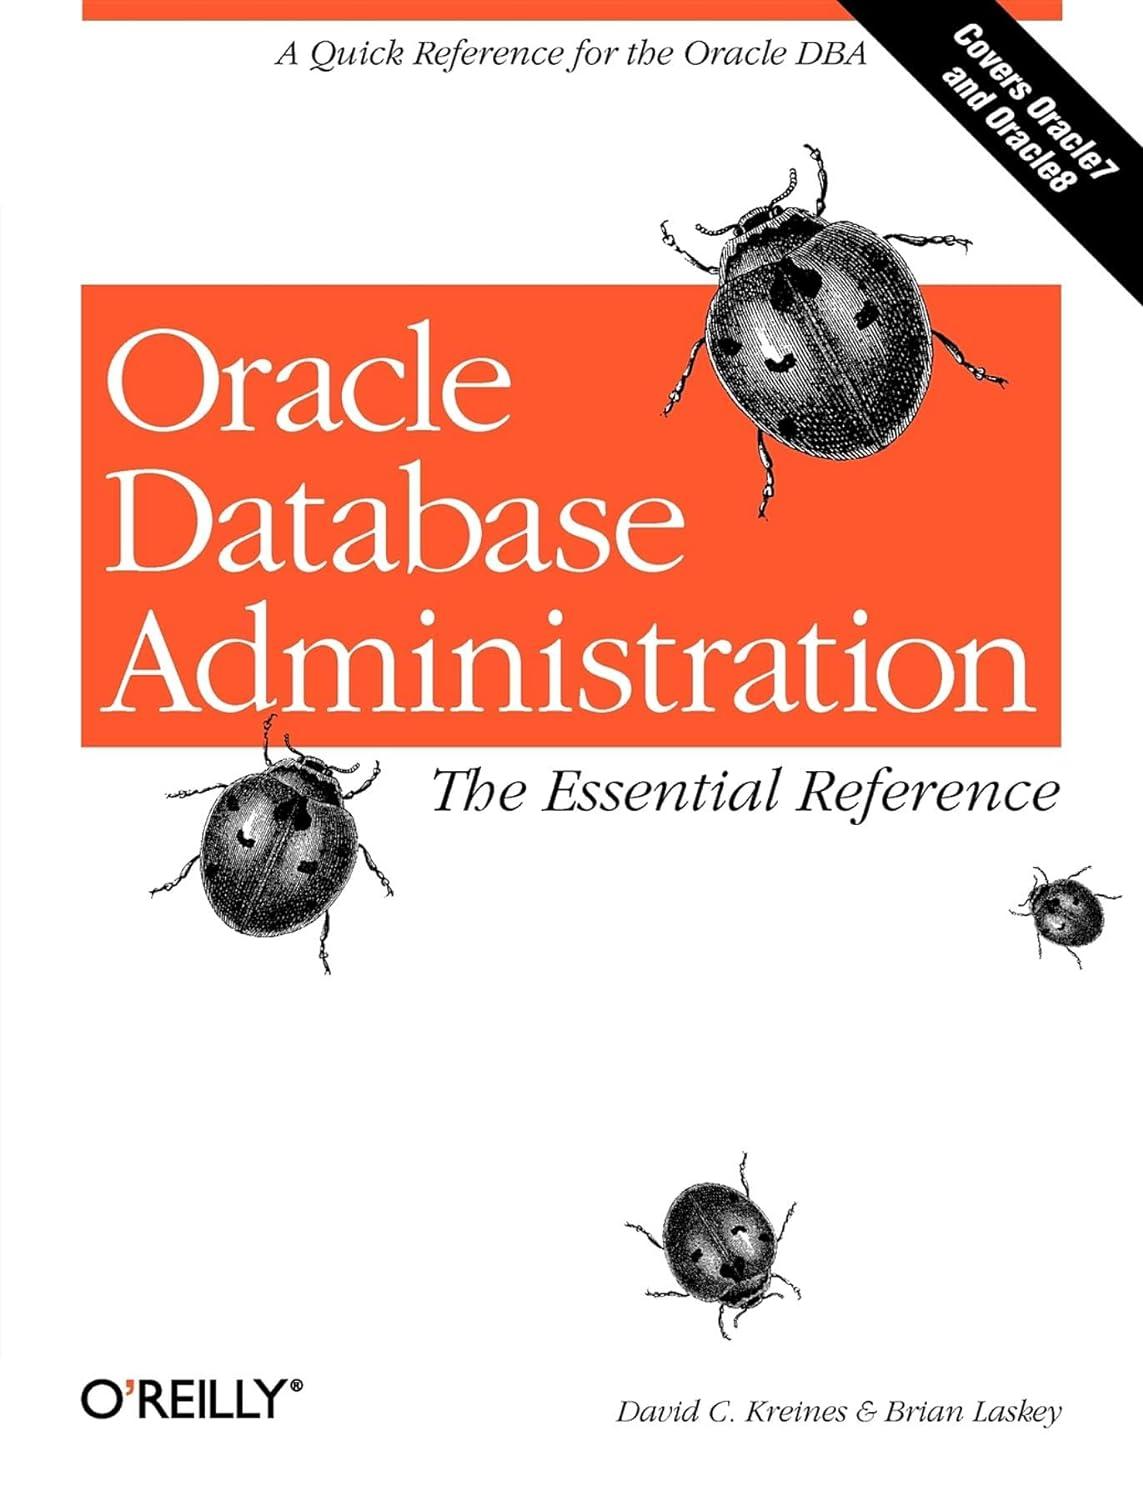 oracle database administration the essential reference 1st edition brian laskey, david kreines 1565925165,